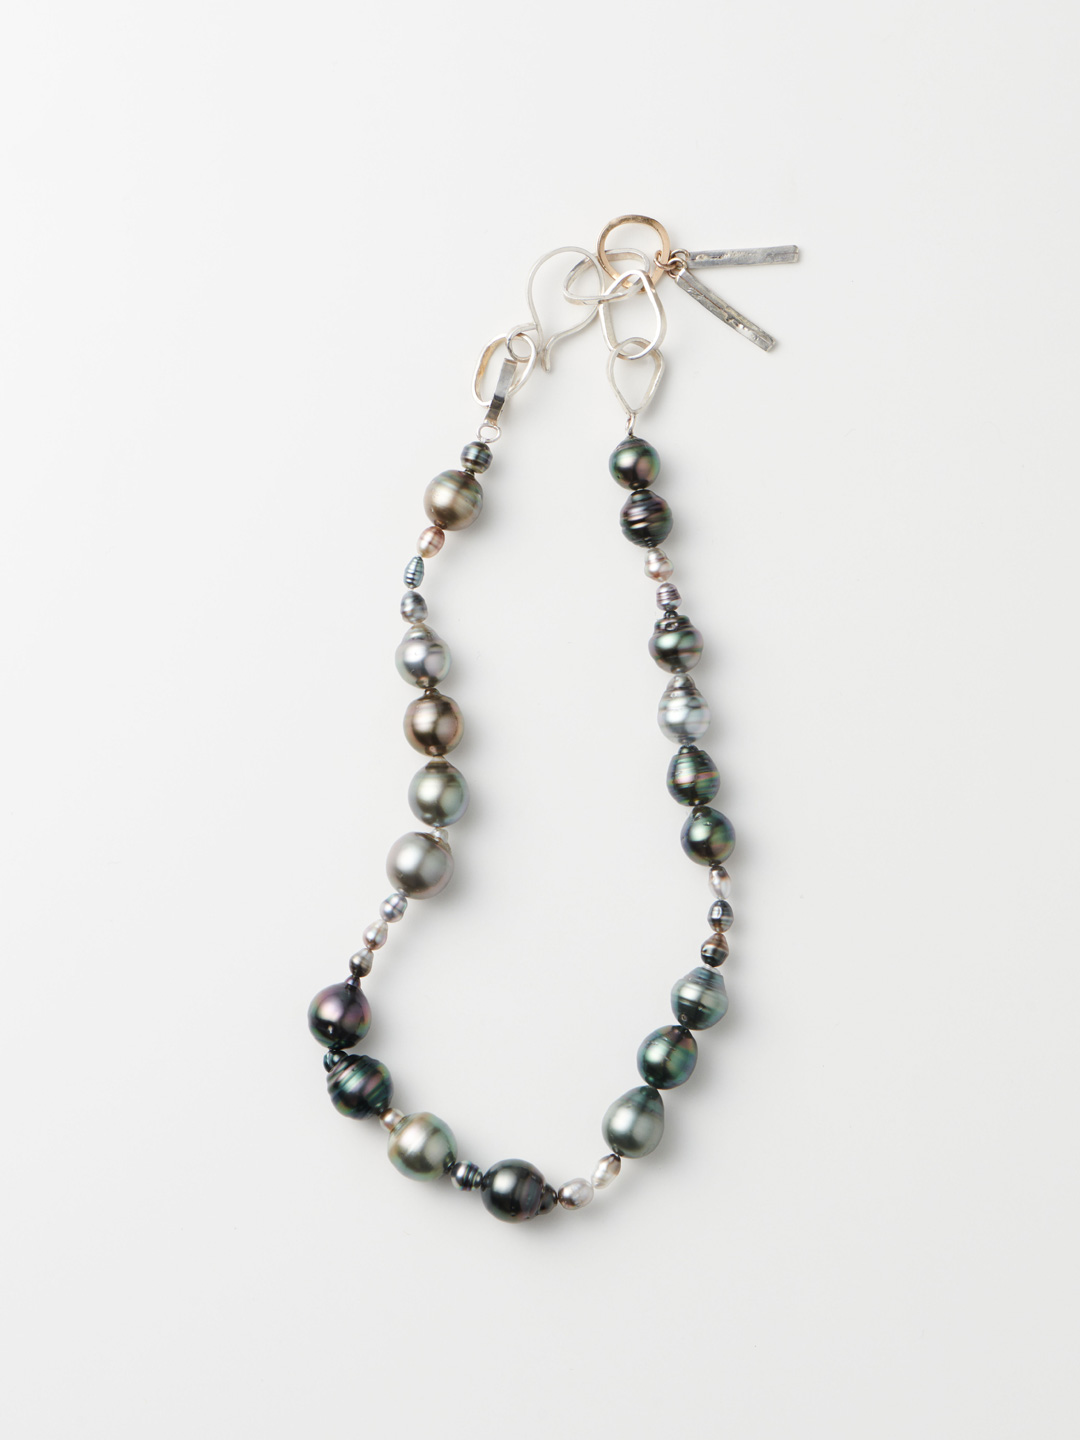 10mm Tahitian Multi Pearl Necklace 40cm【ESCAPERS LIMITED ITEM】